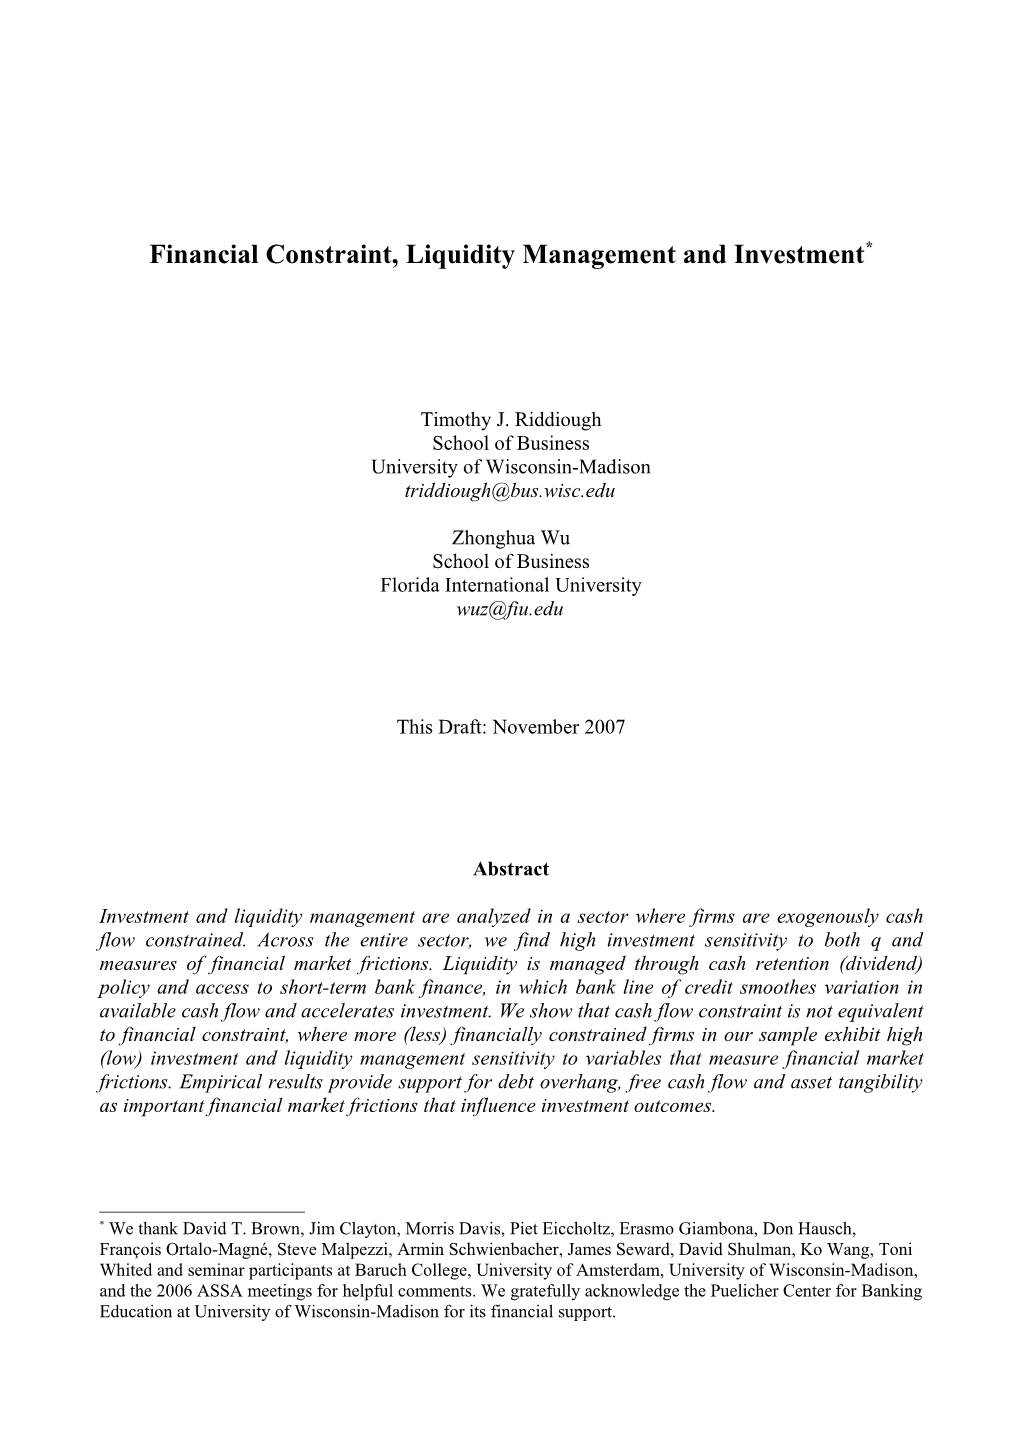 Financial Constraint, Liquidity Management and Investment *